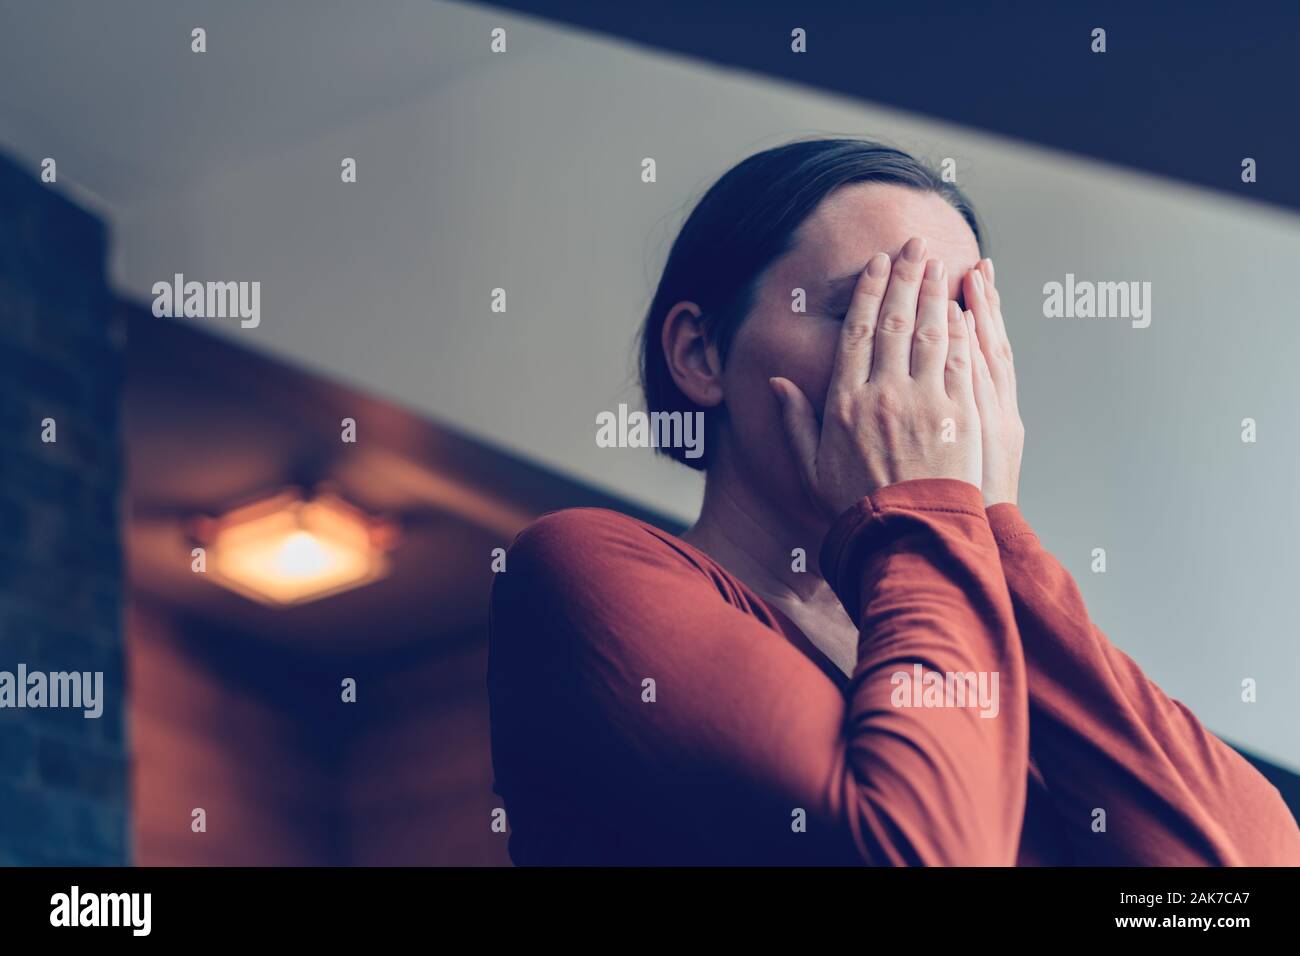 Depressed woman covering face with hands and crying in loft apartment, selective focus Stock Photo